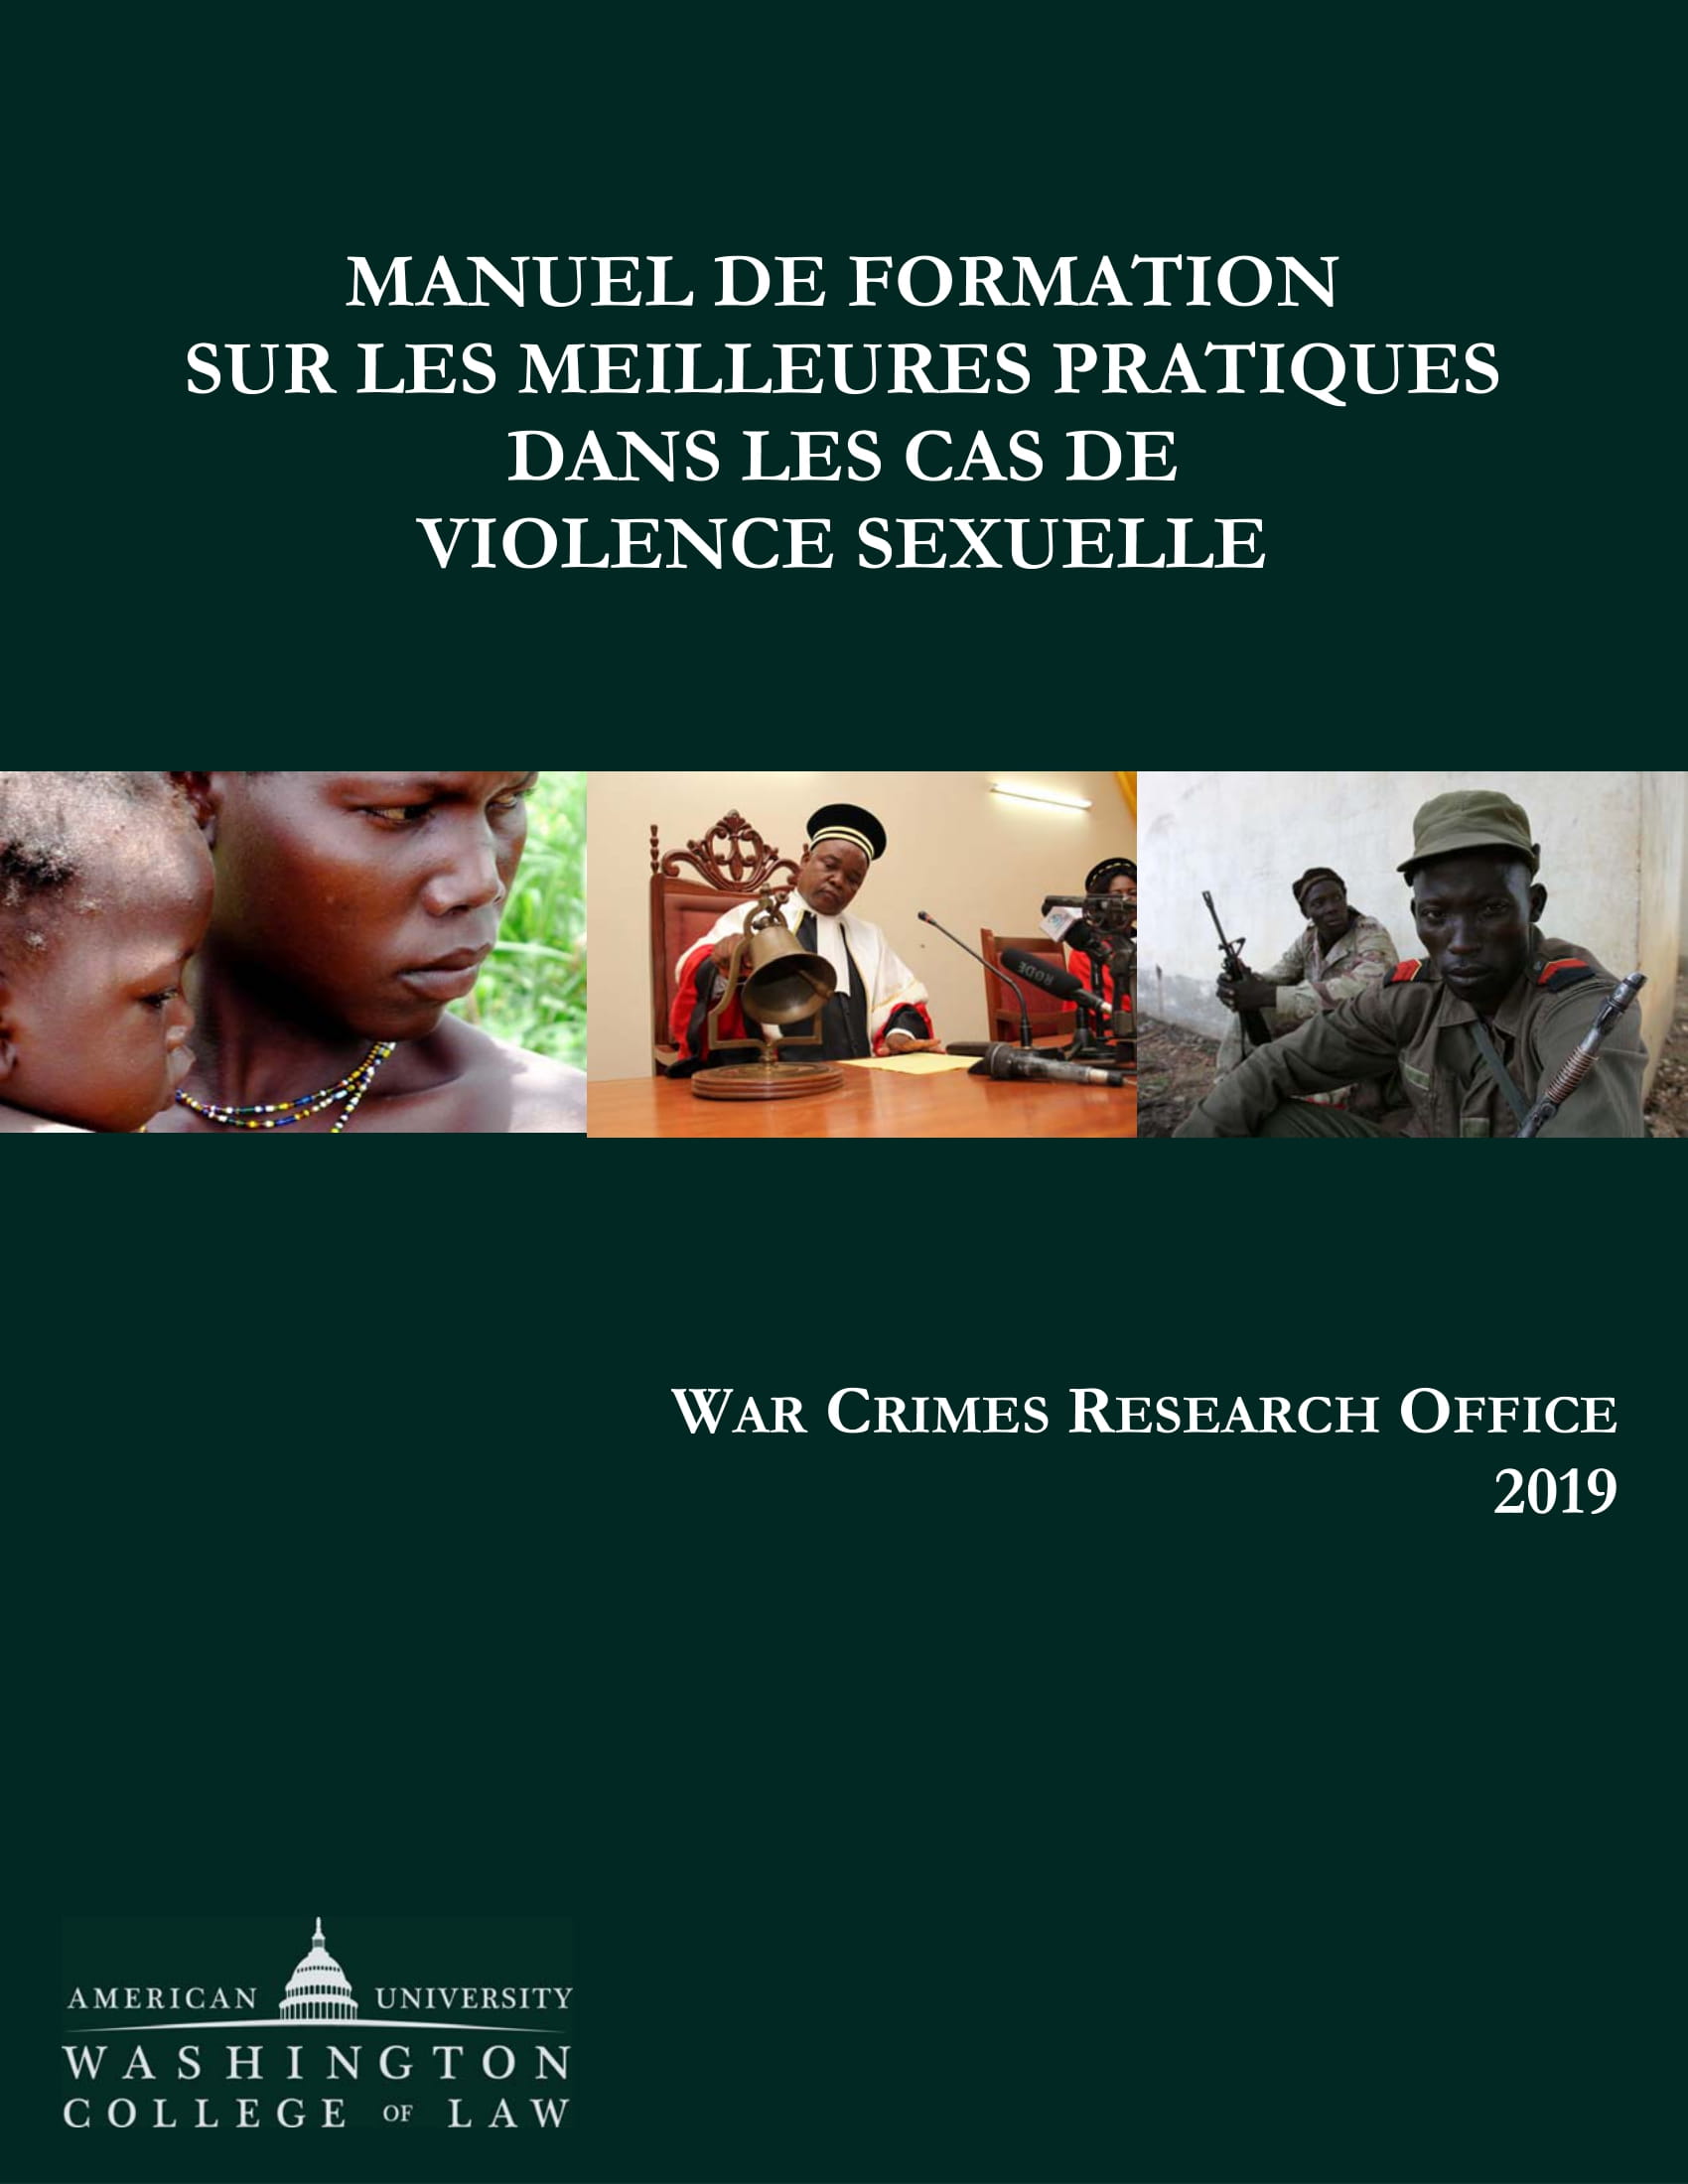 Training Manual on Best Practices in Cases of Sexual Violence (French)